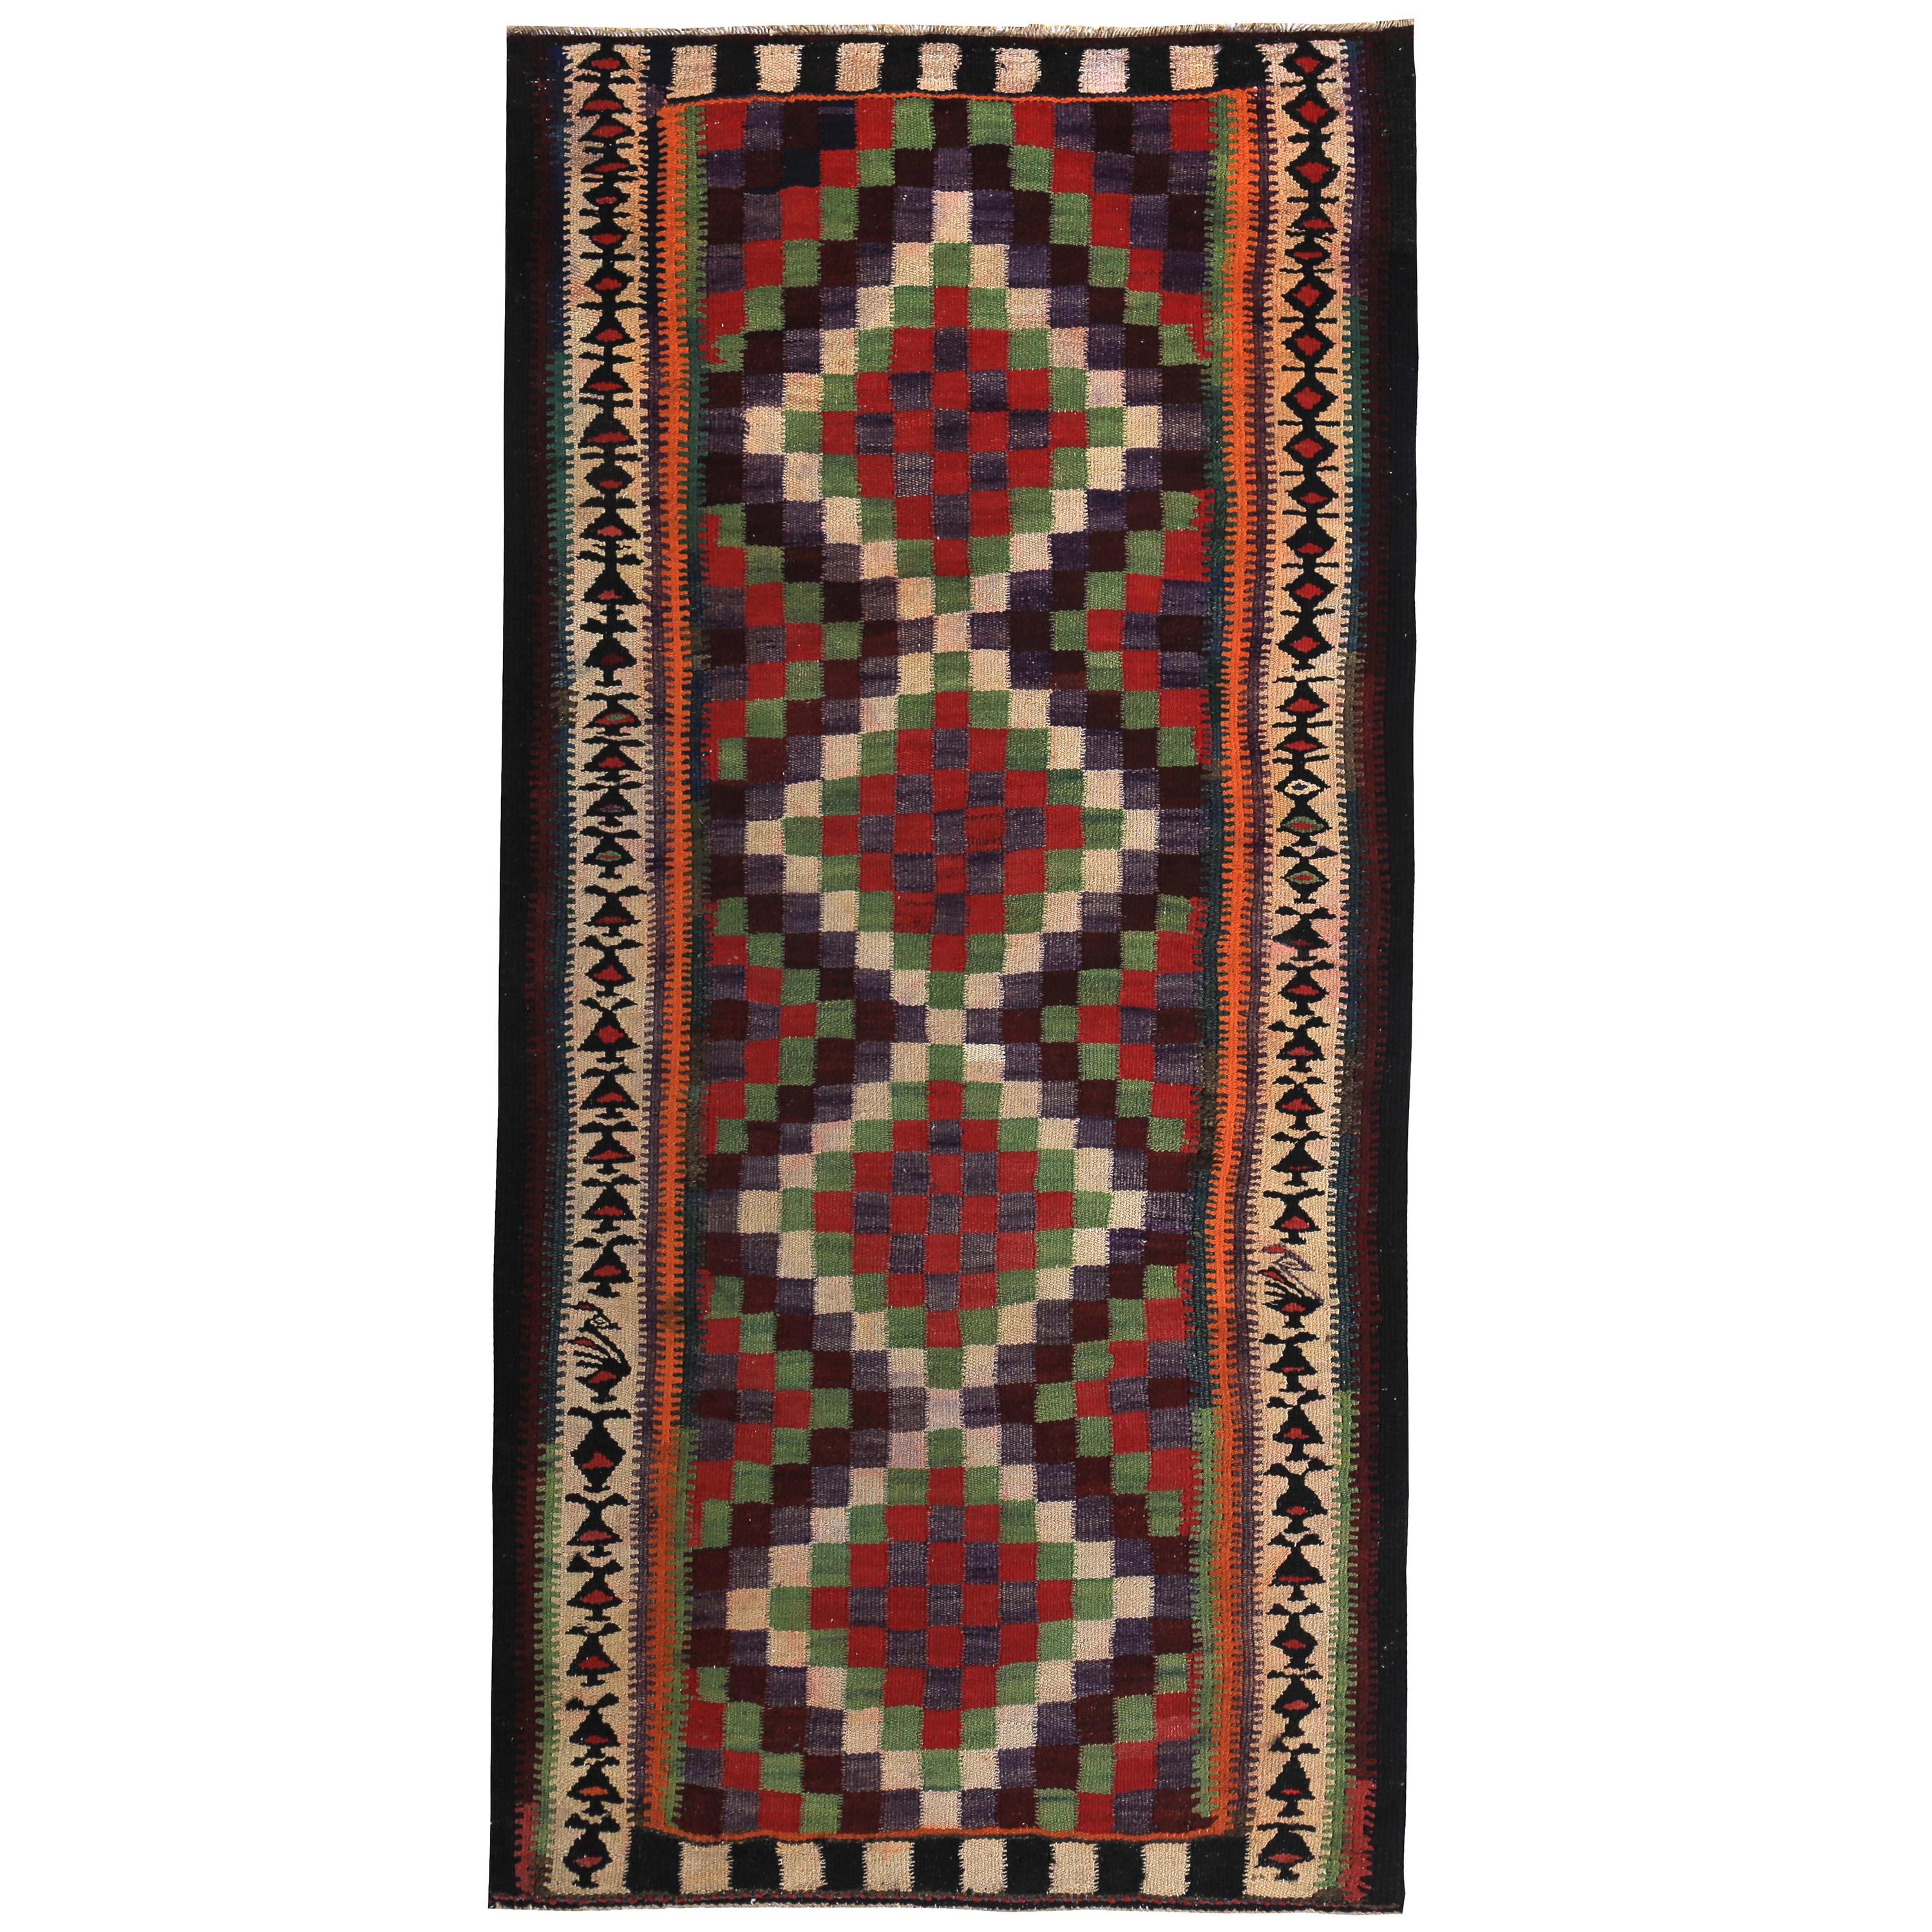 Turkish Kilim Runner Rug with Orange, Blue, Red and Green Checkered Pattern